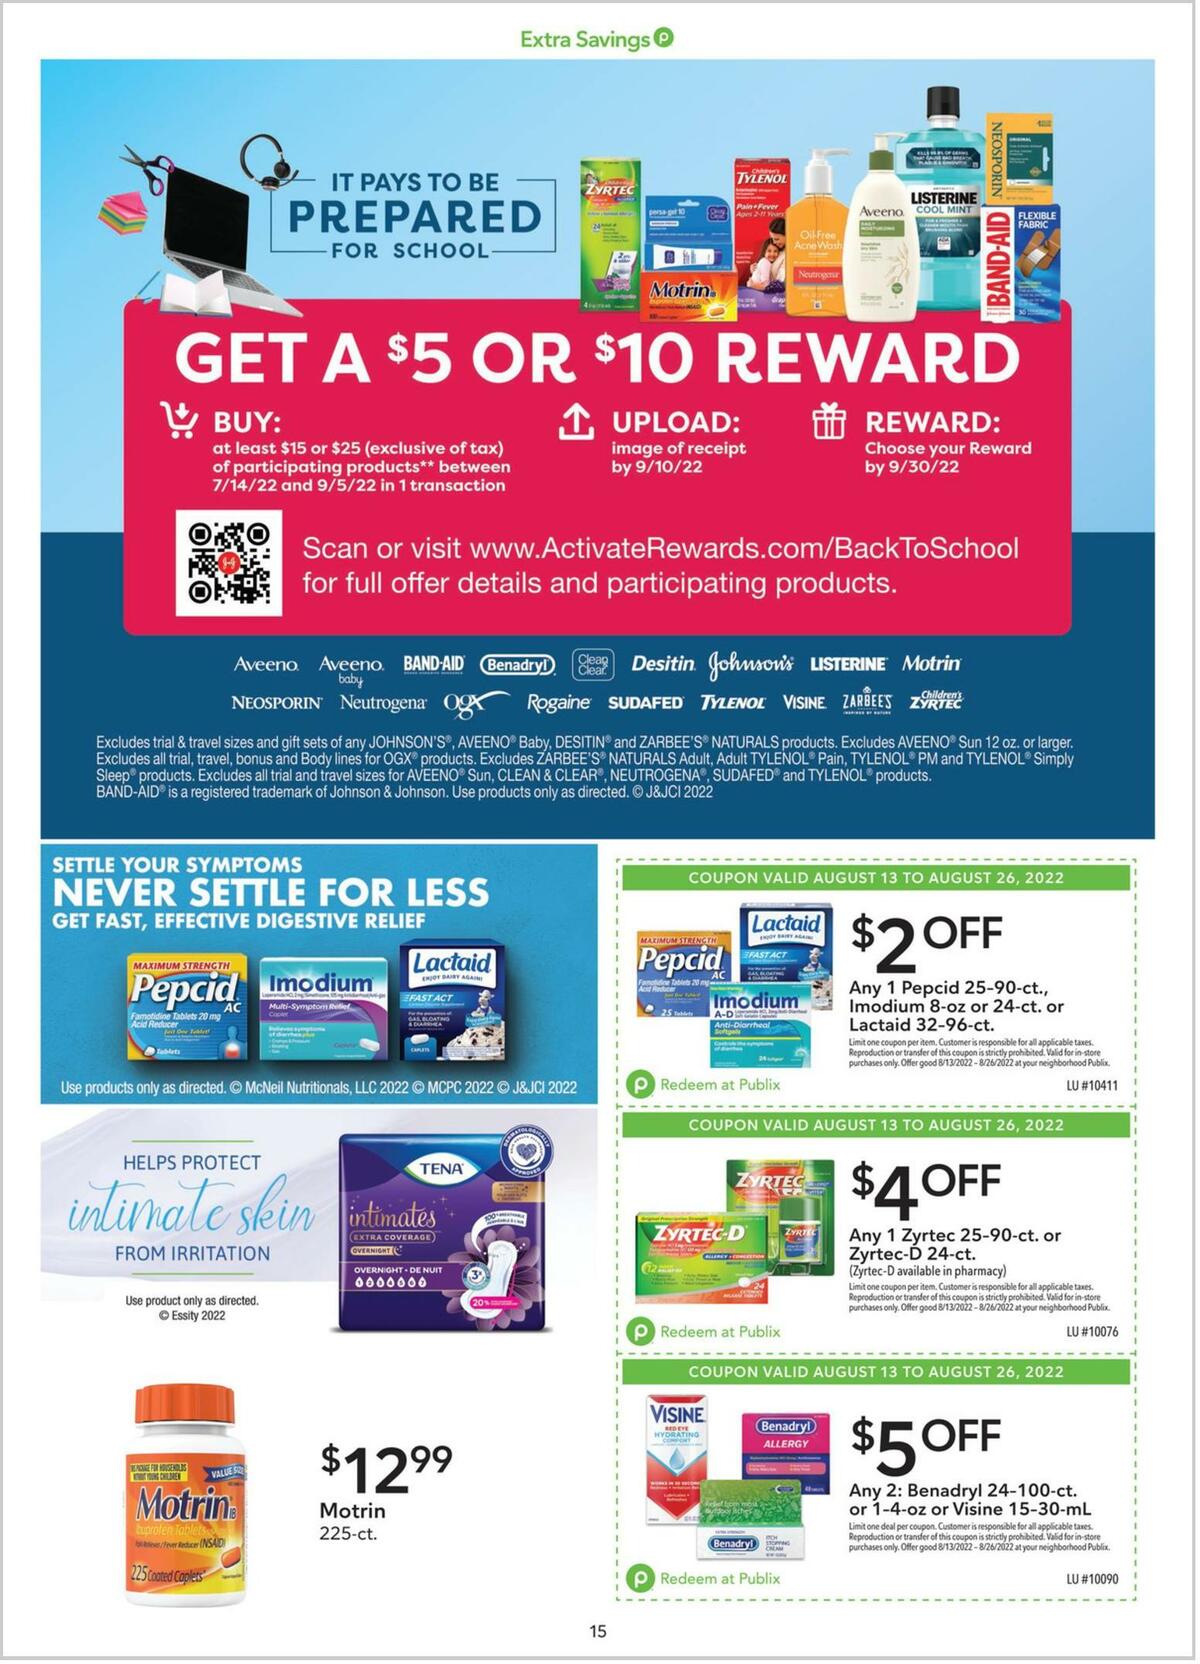 Publix Extra Savings Weekly Ad from August 13